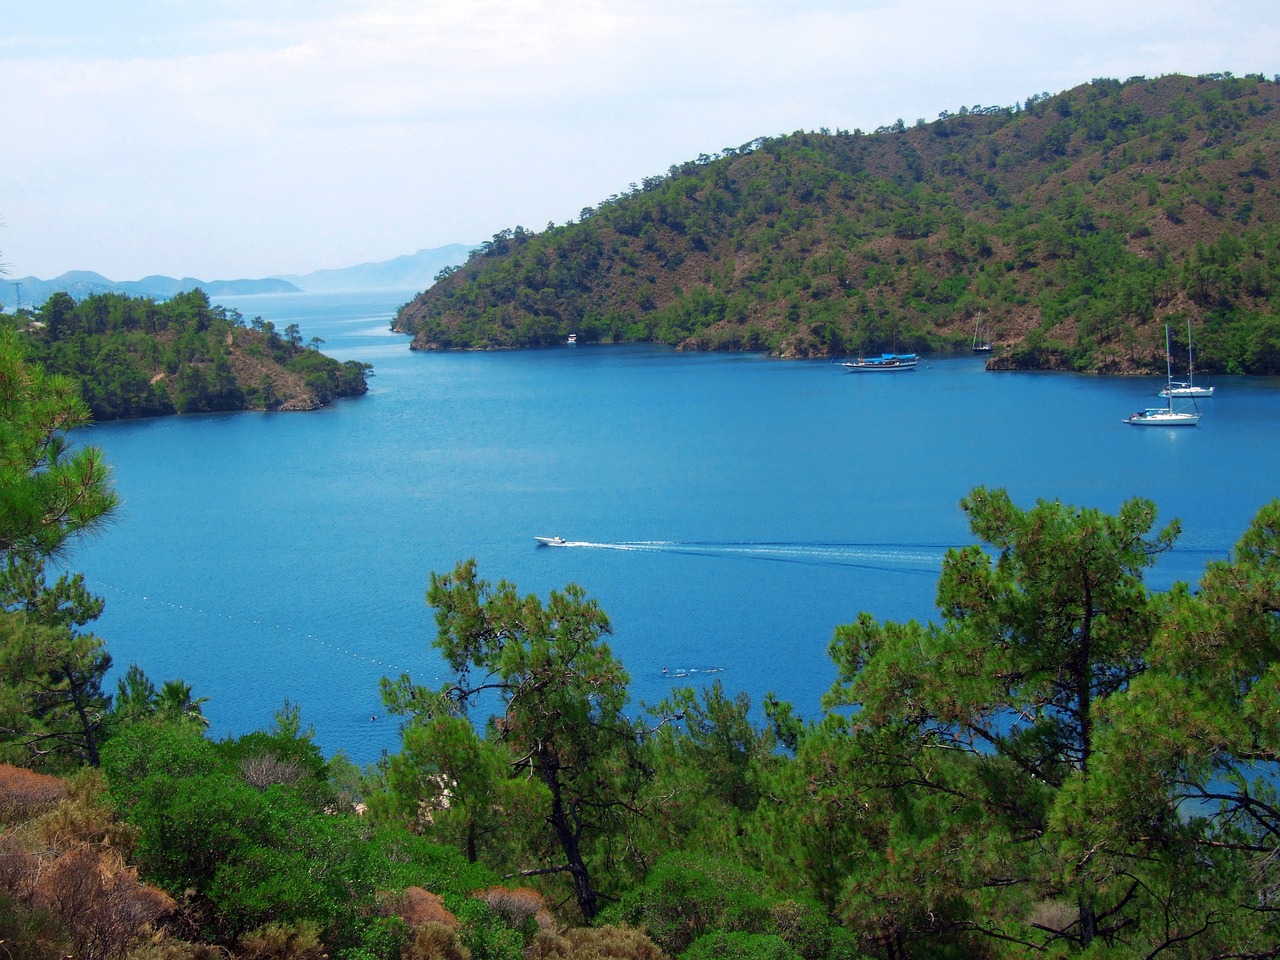 5 Days of Sea Activities in Marmaris: Boat Trips, Diving, and More